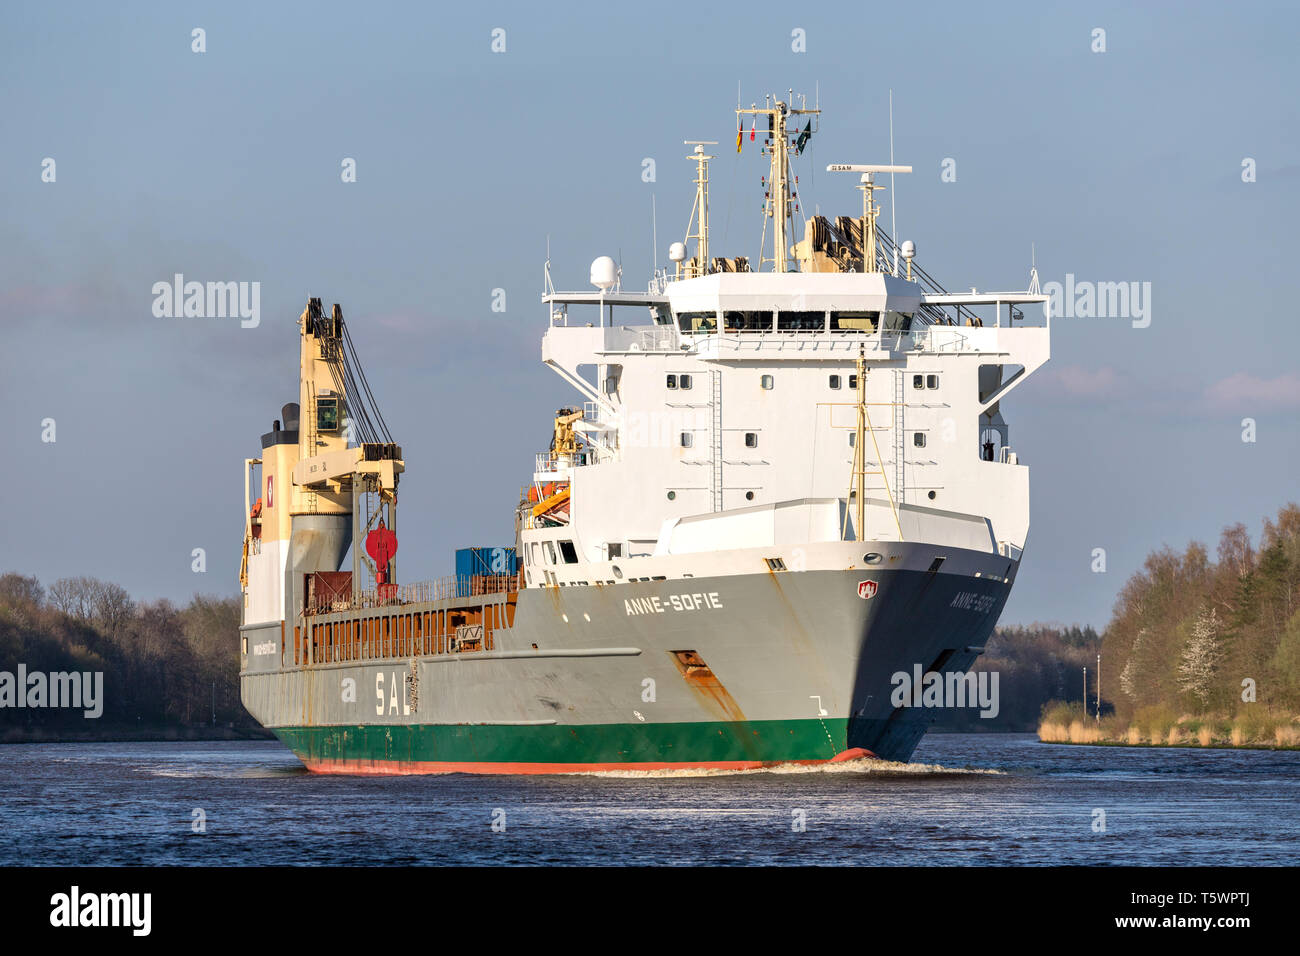 ANNE-SOFIE in the Kiel Canal. SAL Heavy Lift is one of the world’s leading carriers specialised in sea transport of heavy lift and project cargo. Stock Photo